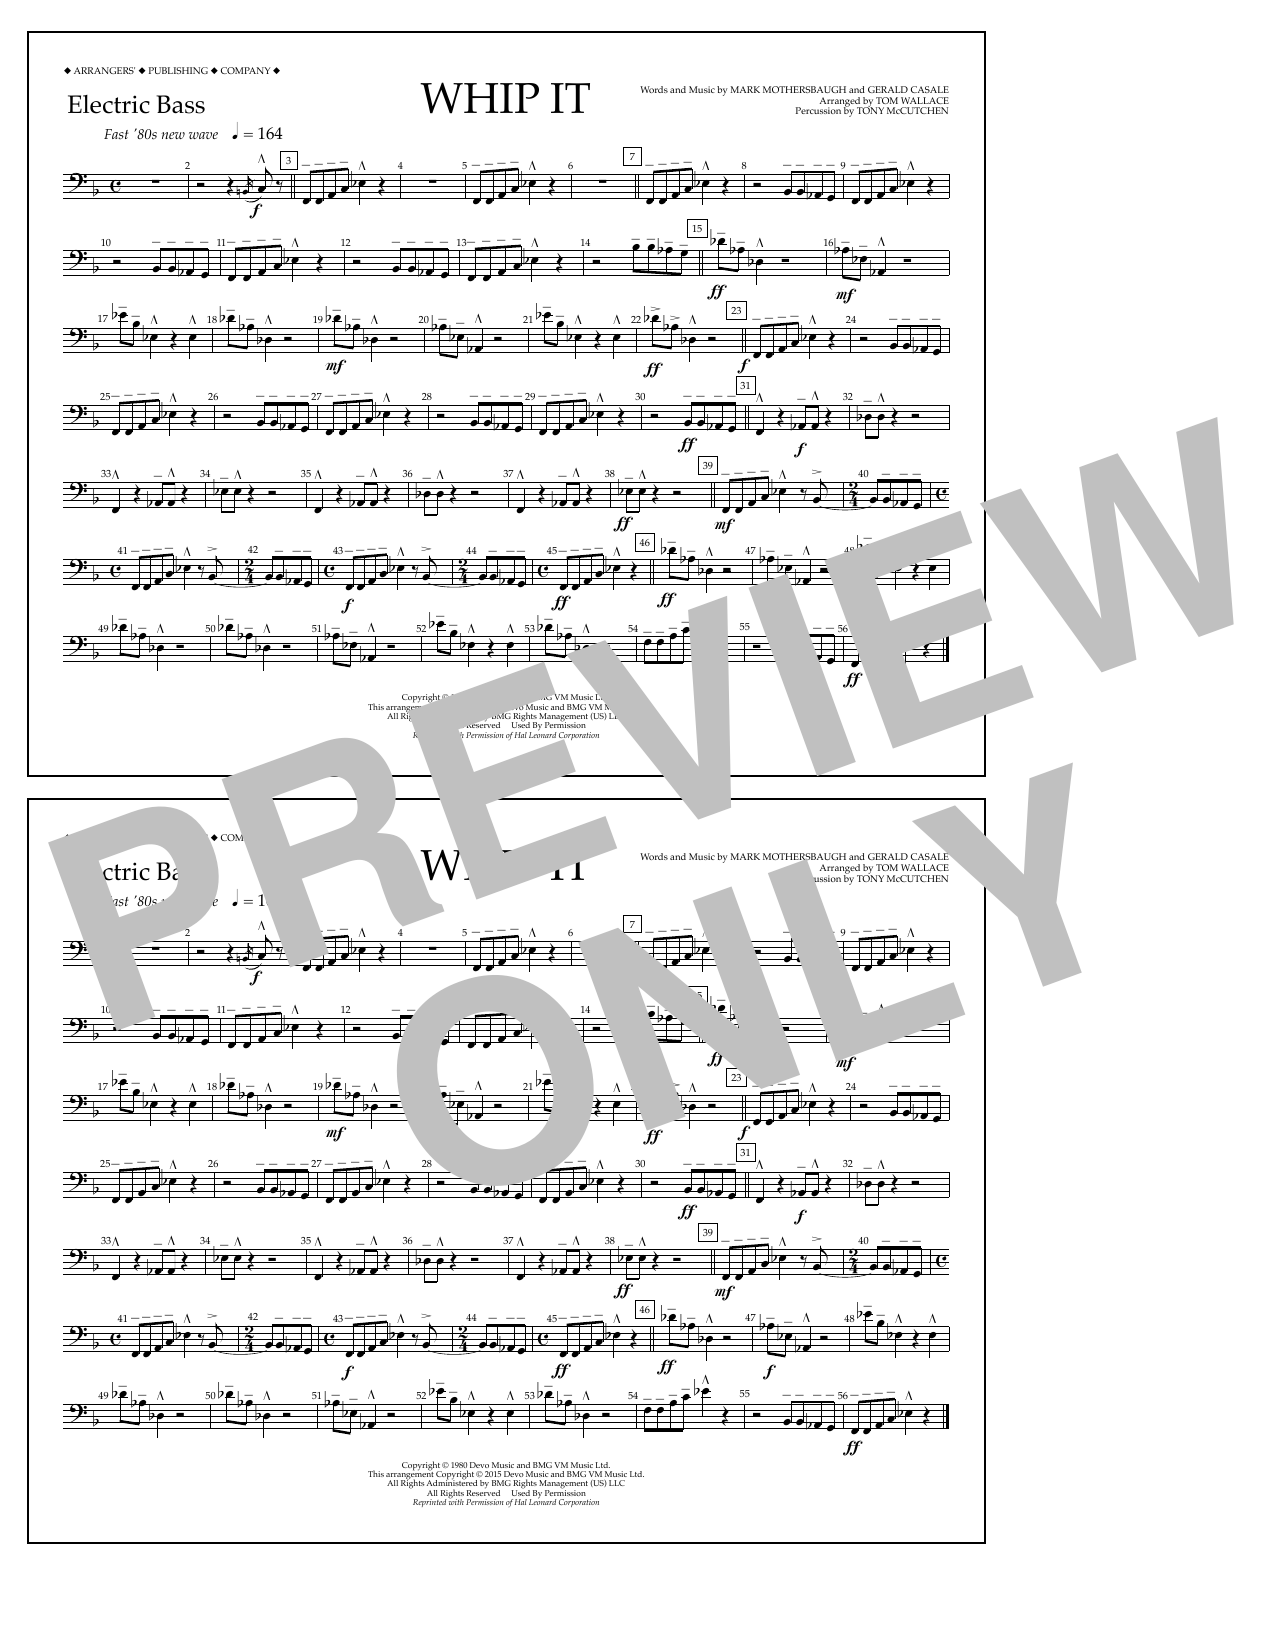 Download Tom Wallace Whip It - Electric Bass Sheet Music